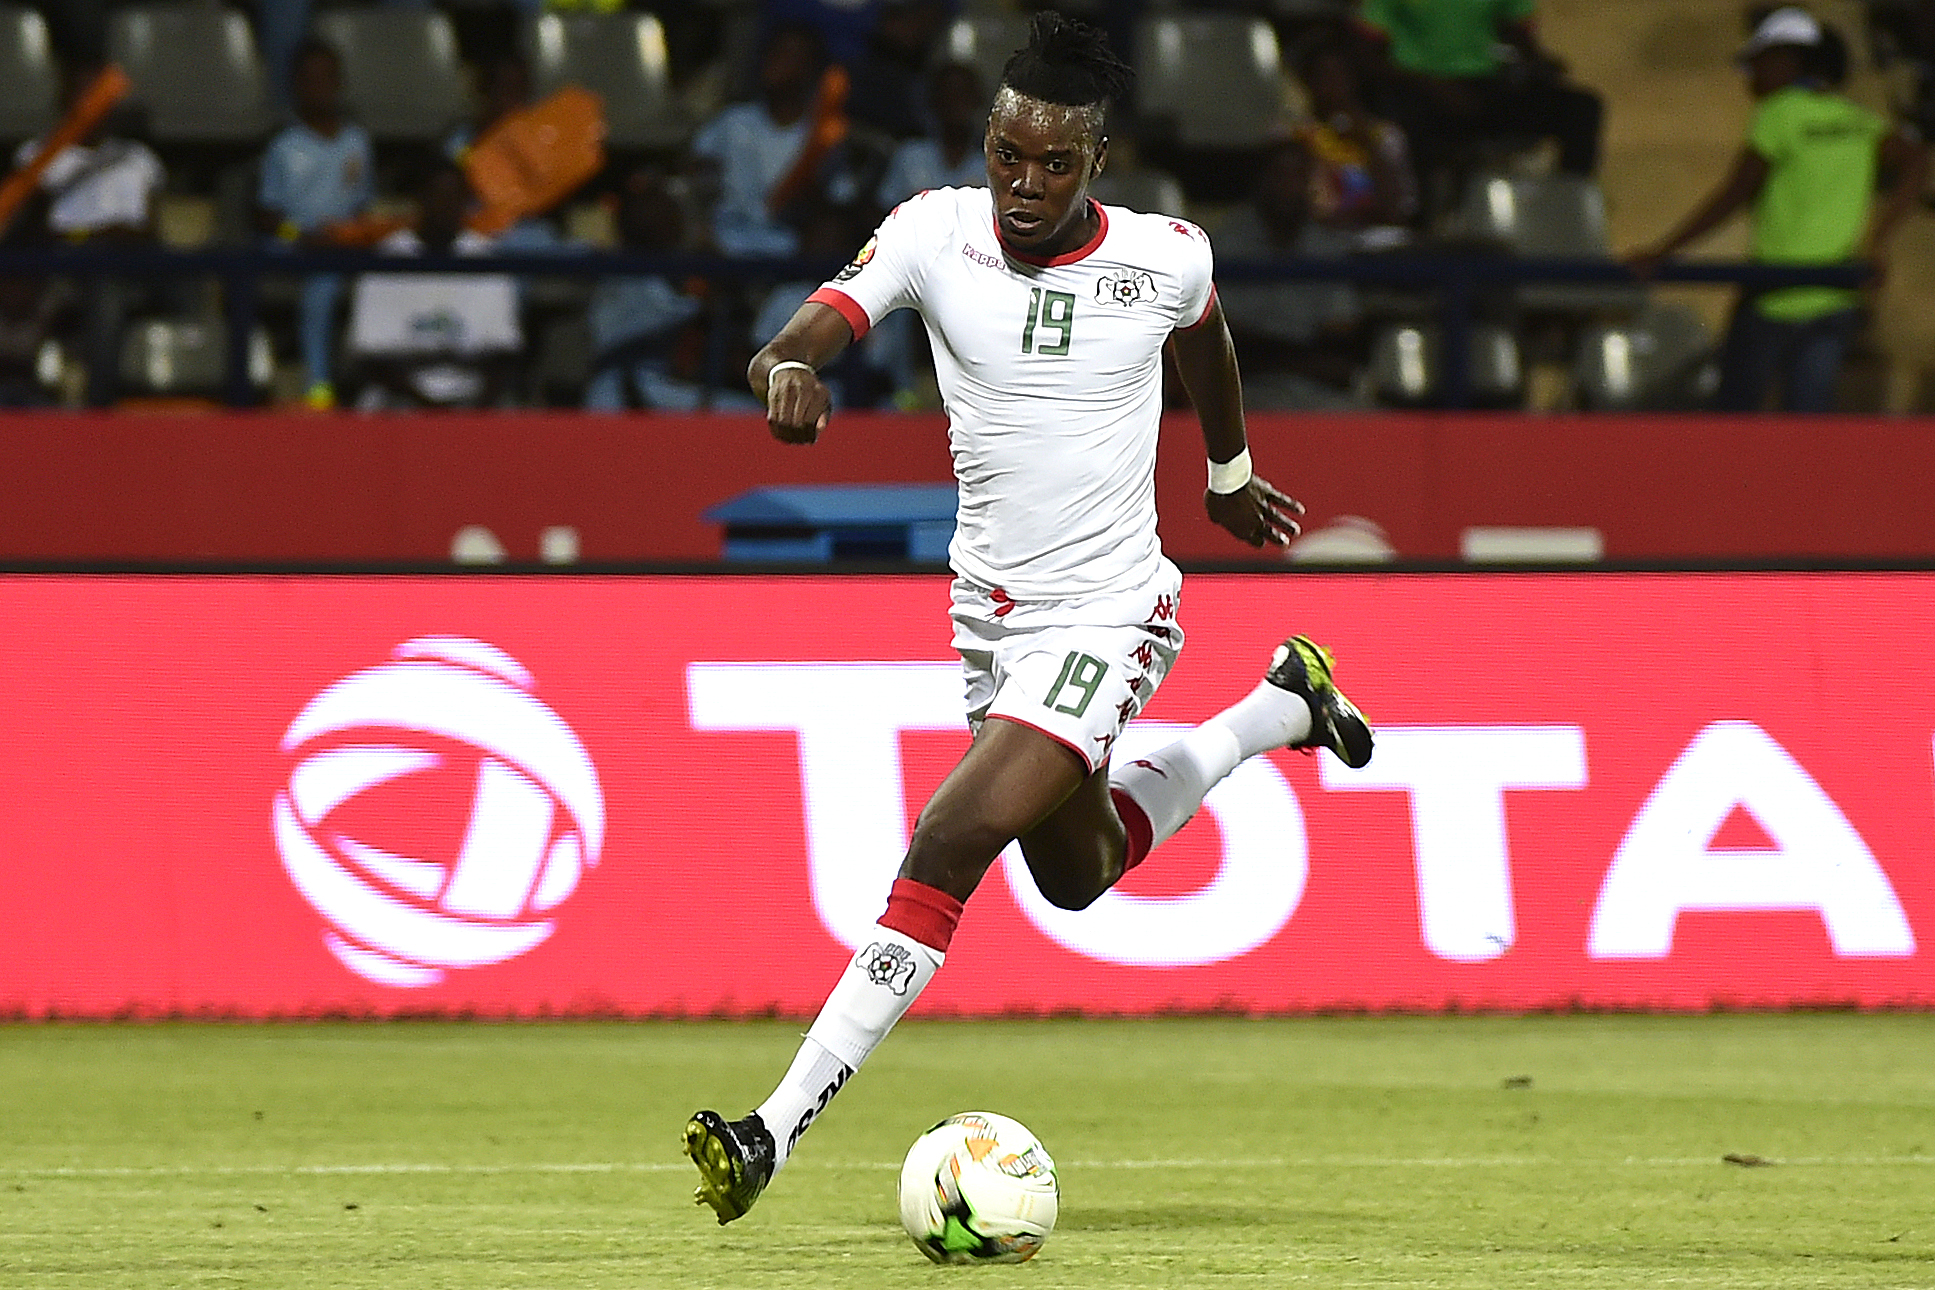 Burkina Faso's forward Bertrand Traore runs with the ball during the 2017 Africa Cup of Nations group A football match between Guinea-Bissau and Burkina Faso in Franceville on January 22, 2017. / AFP / KHALED DESOUKI        (Photo credit should read KHALED DESOUKI/AFP/Getty Images)